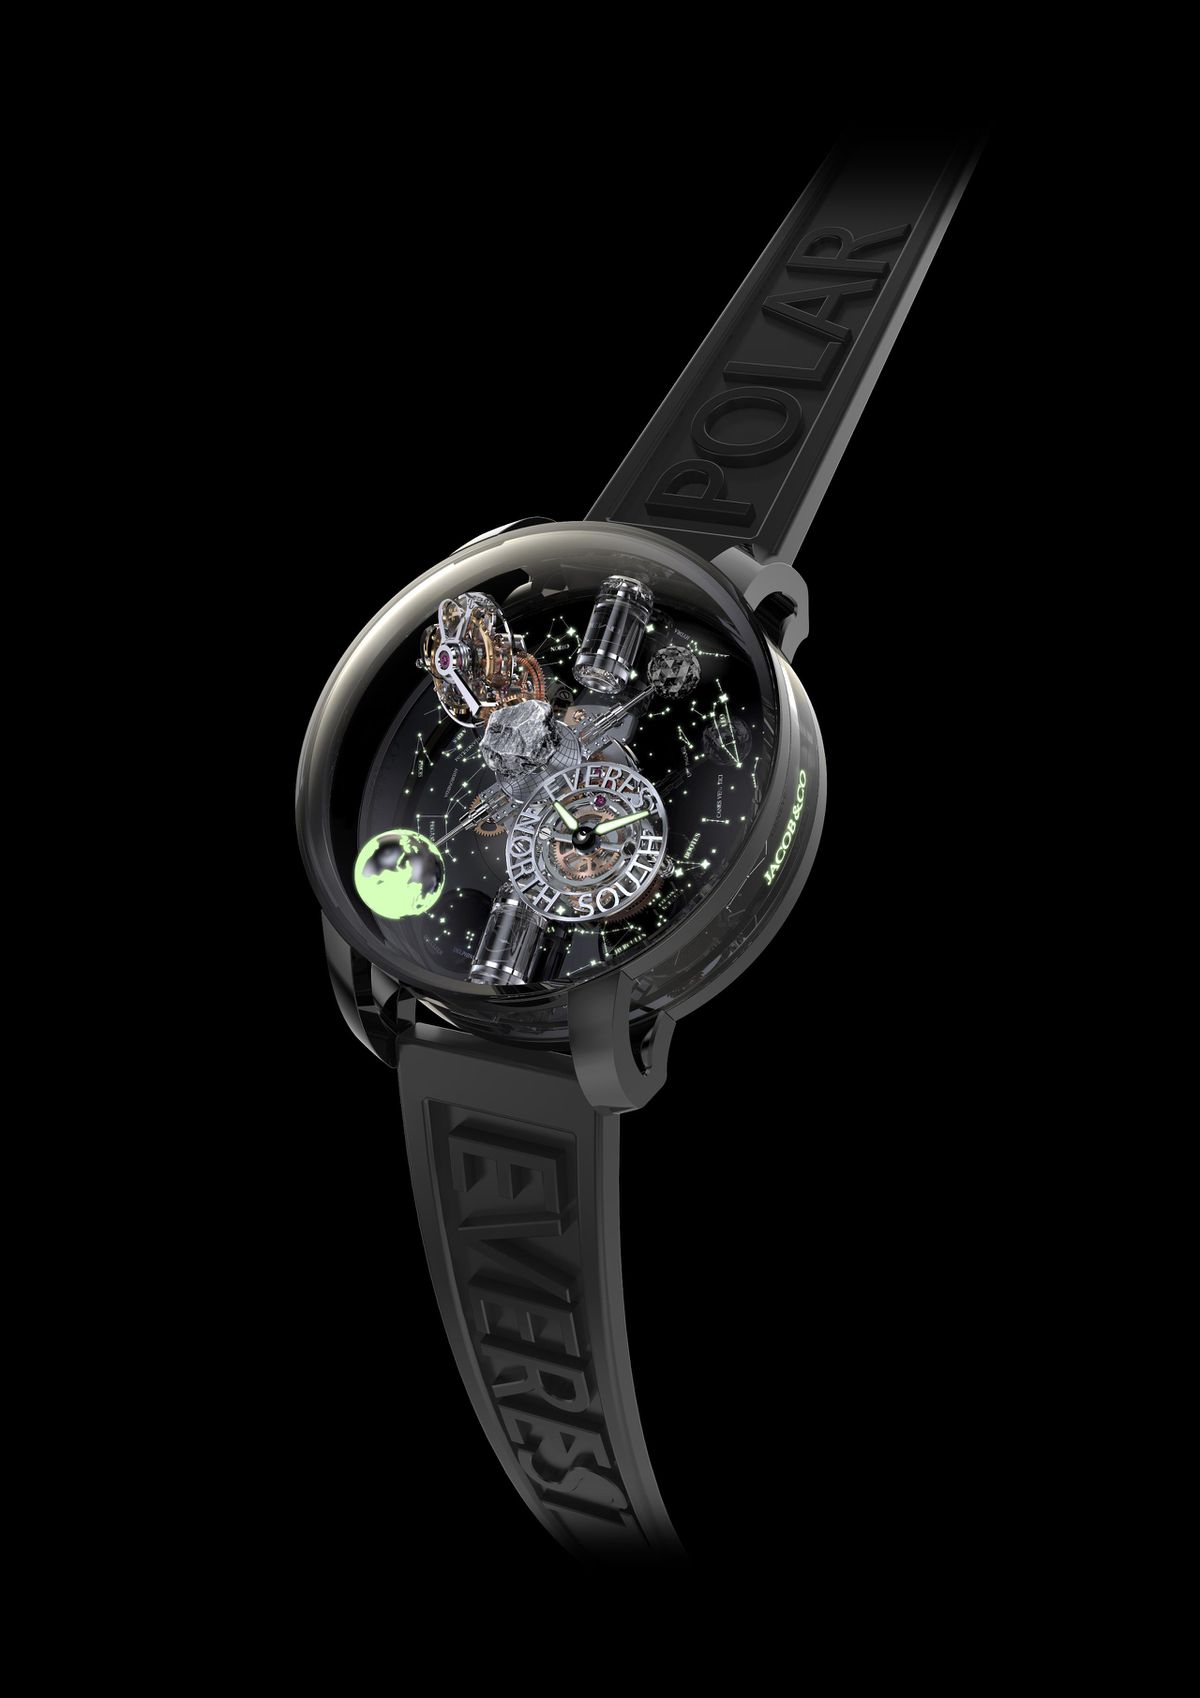 Climbing Mount Everest with an $800,000 Jacob & Co. Astronomia Everest Watch on the Wrist 